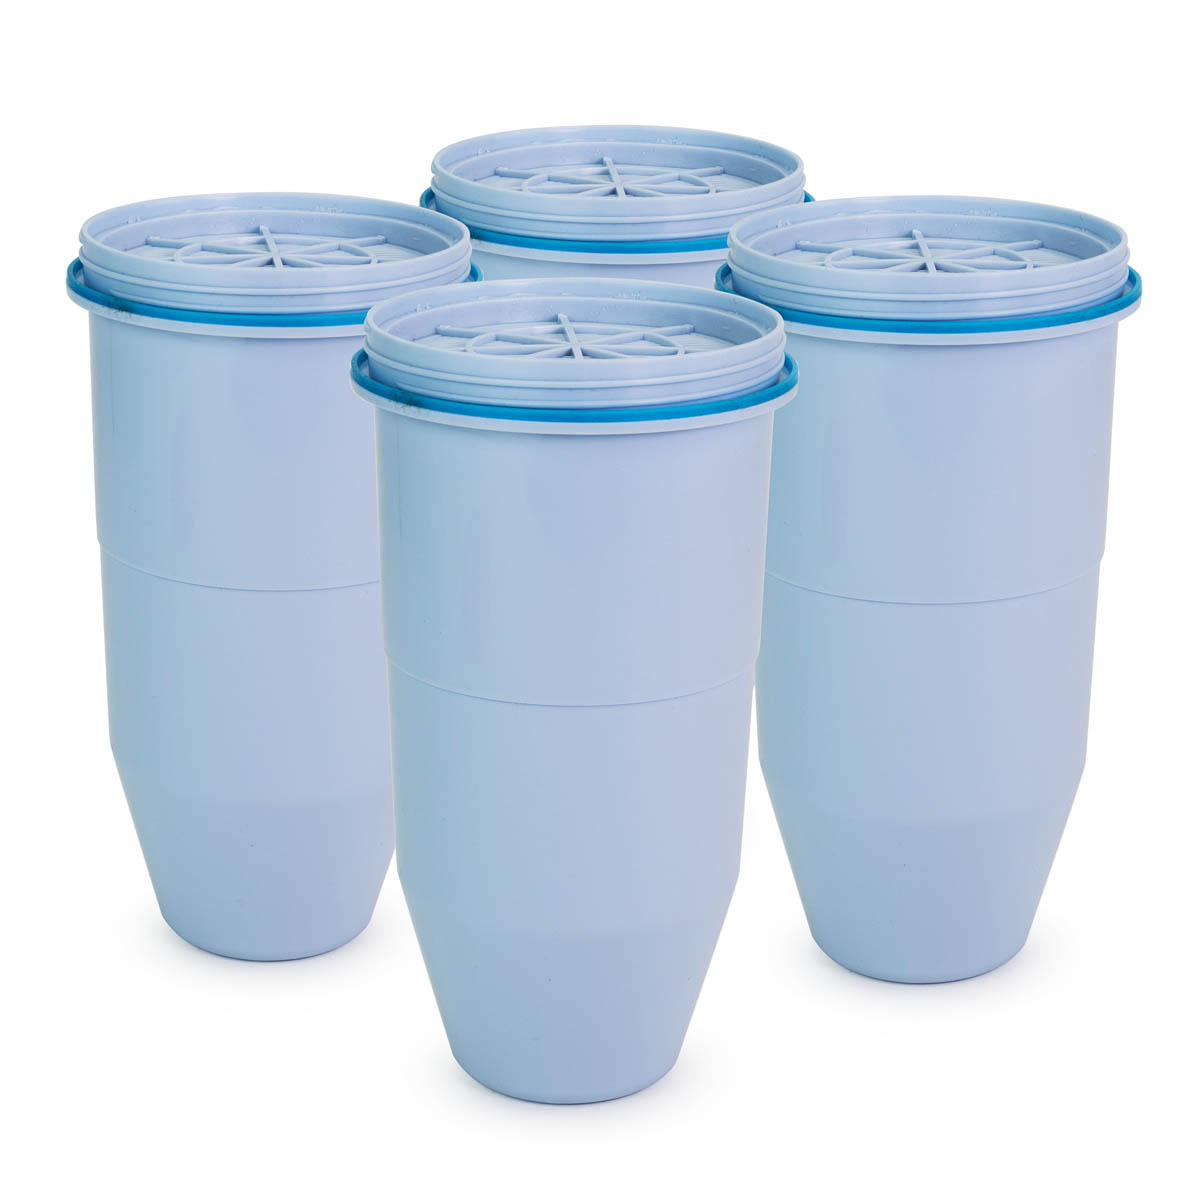 EcoAqua Replacement for Zerowater® Pitcher Water Filter, 4-Pack